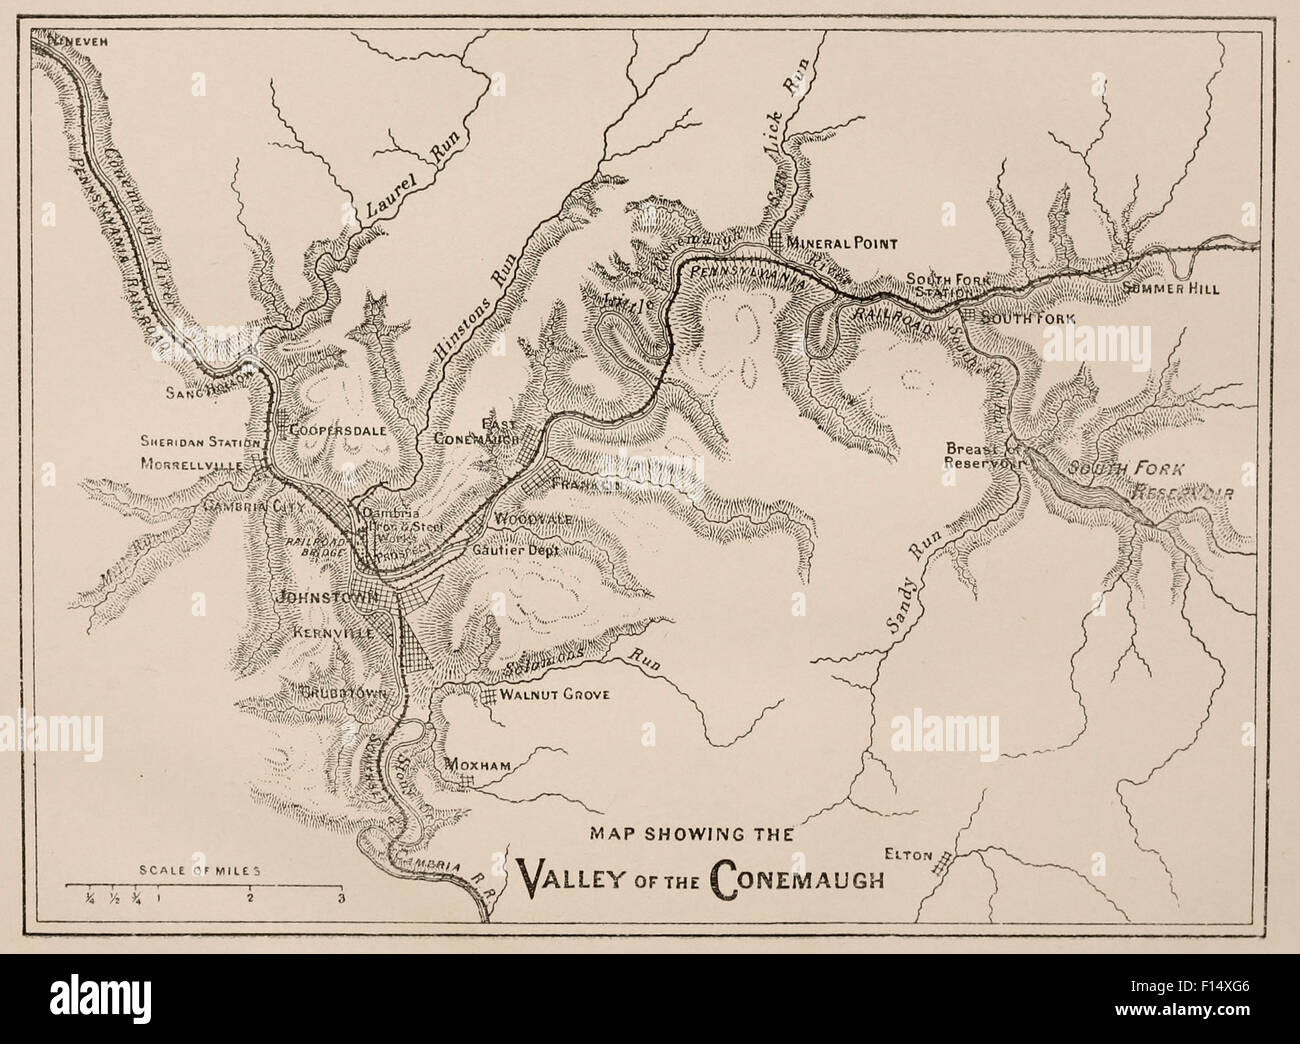 Map showing the Valley of the Conemaugh at the time of the Johnstown Flood, 1889 Stock Photo